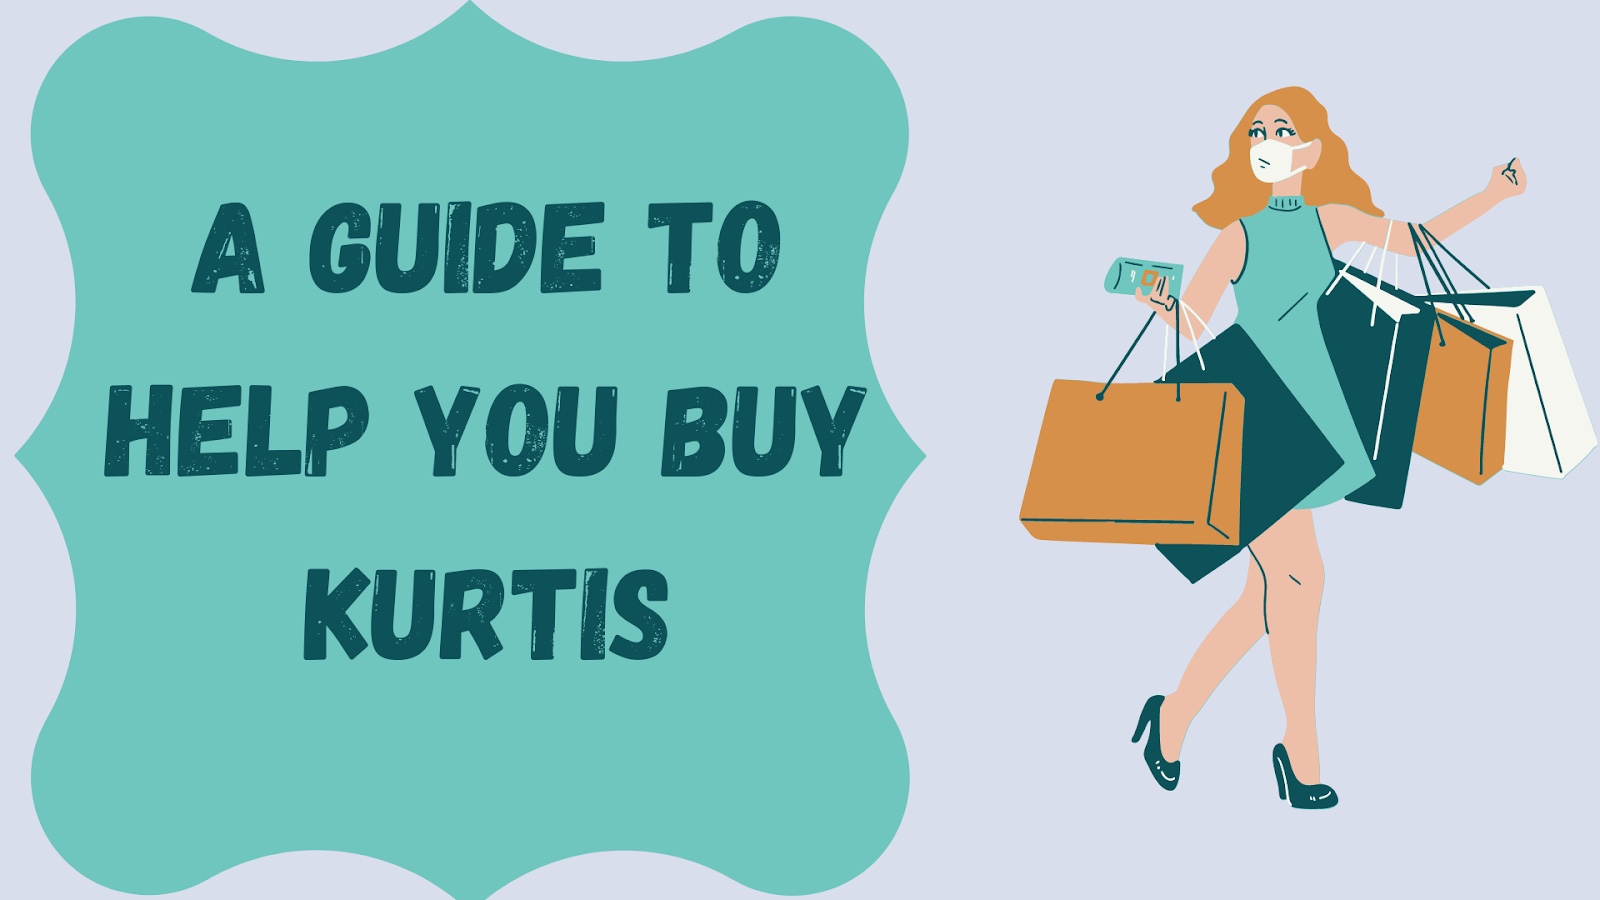 A MANUAL FOR ASSIST YOU WITH PURCHASING KURTIS.